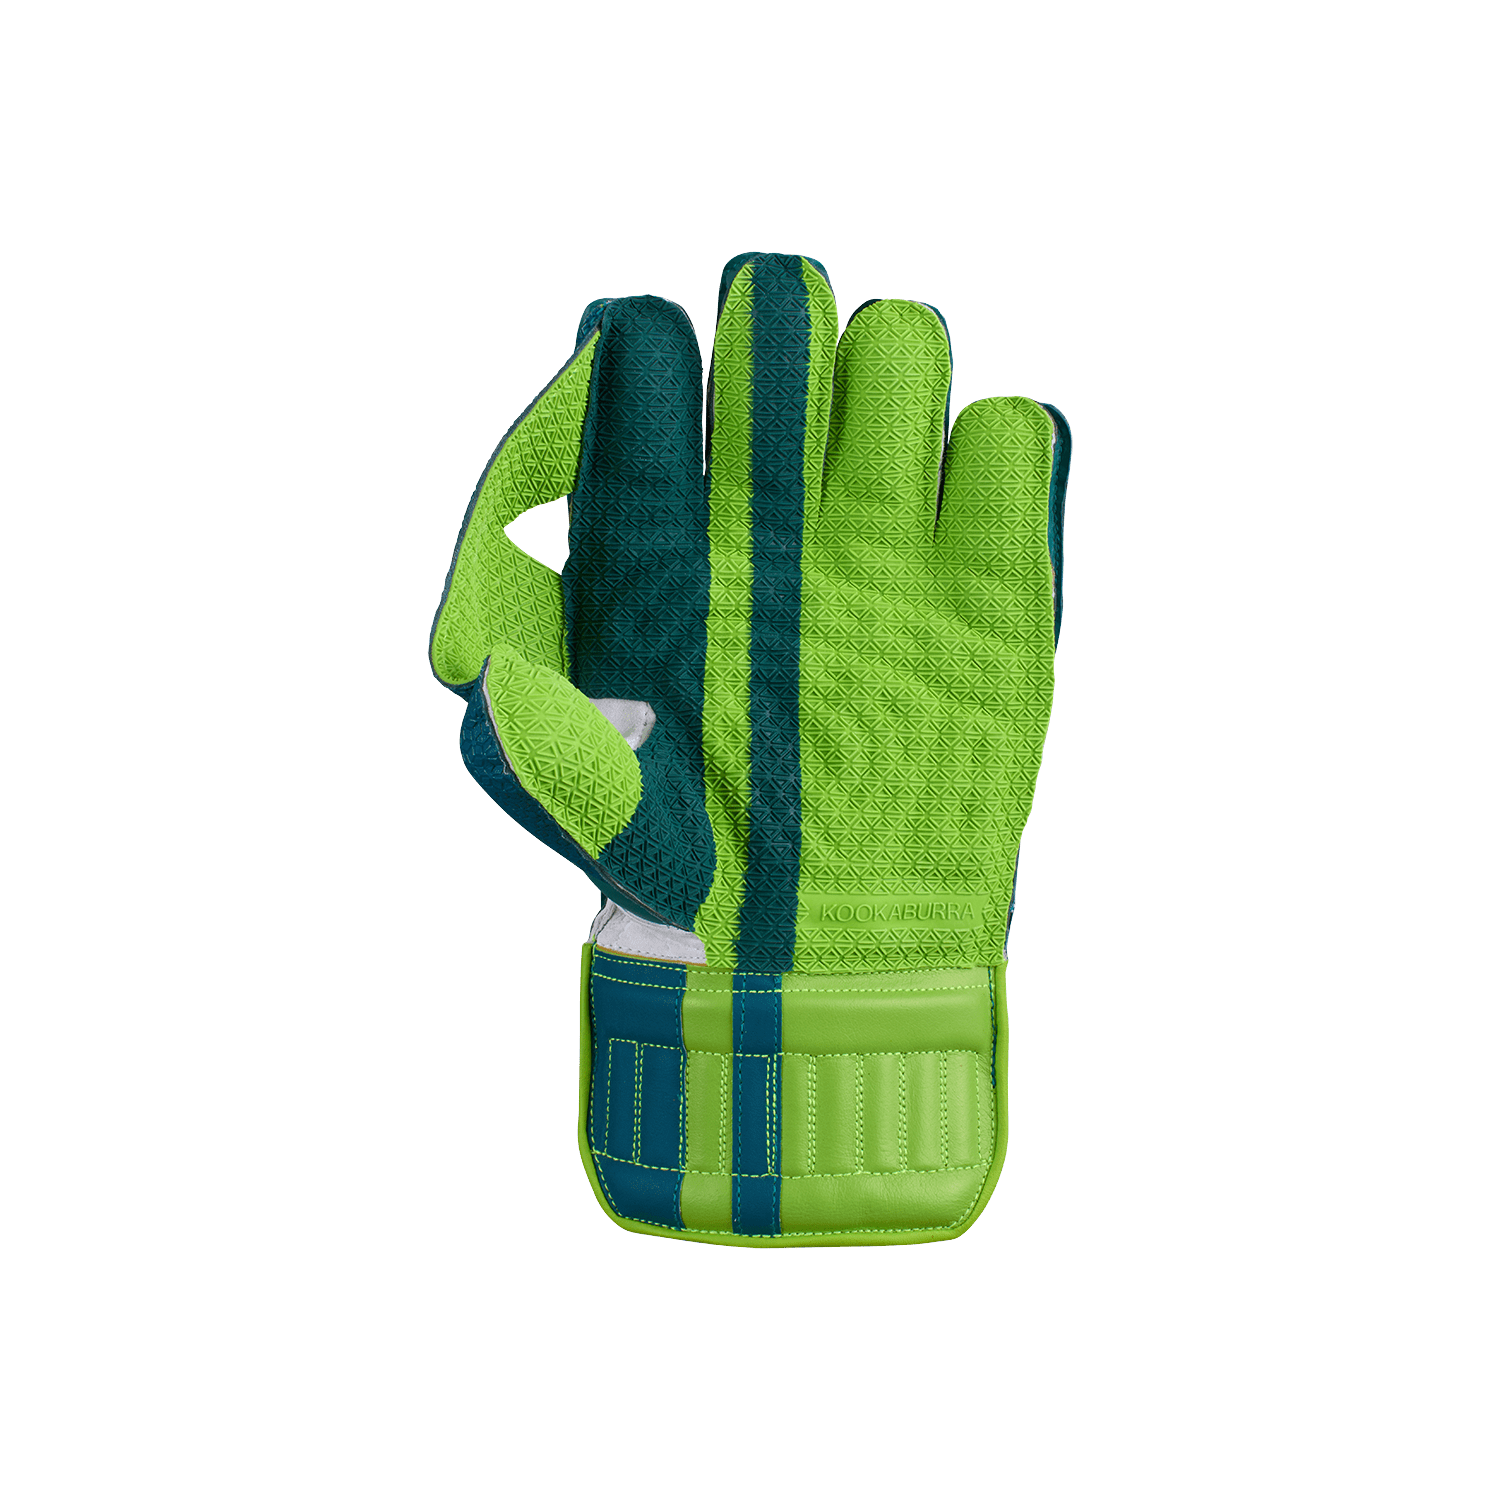 LC 10 WICKET KEEPING GLOVE